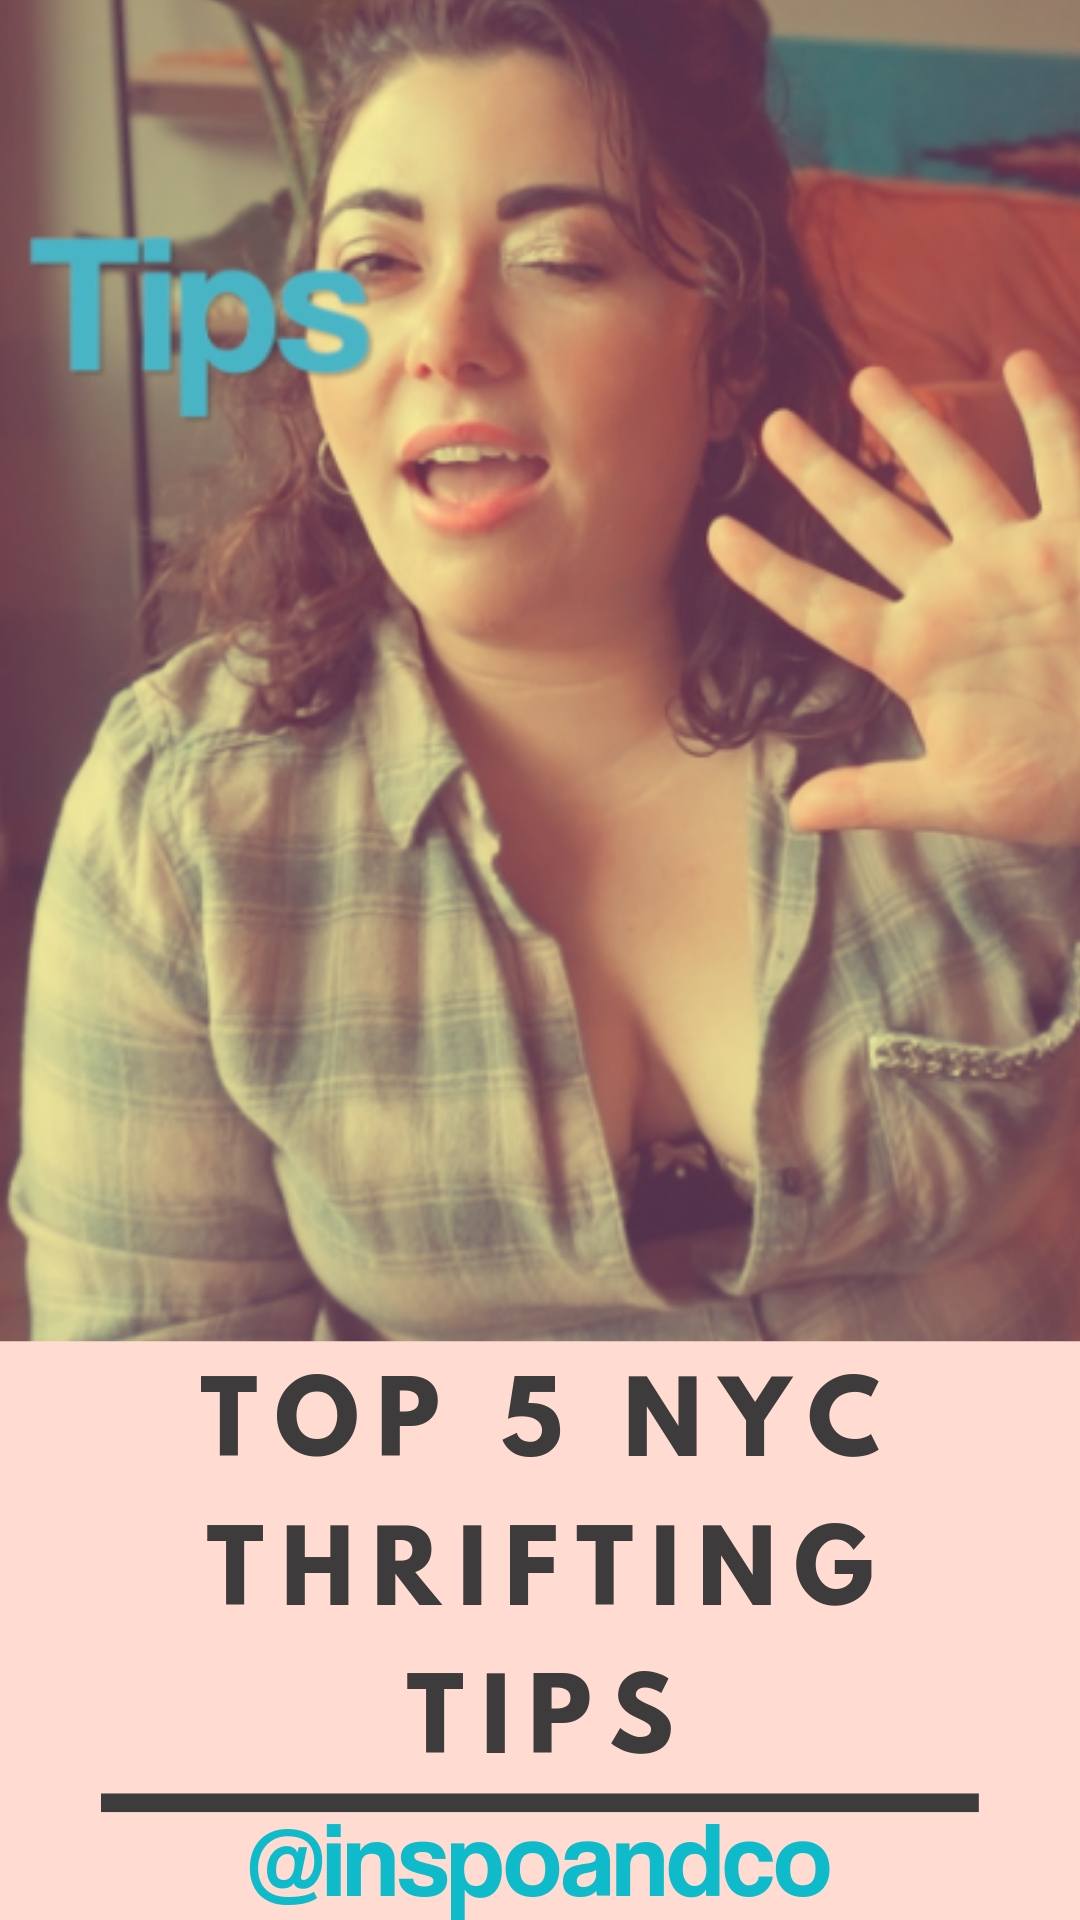 INSPO AND CO Top 5 nyc thrifting tips